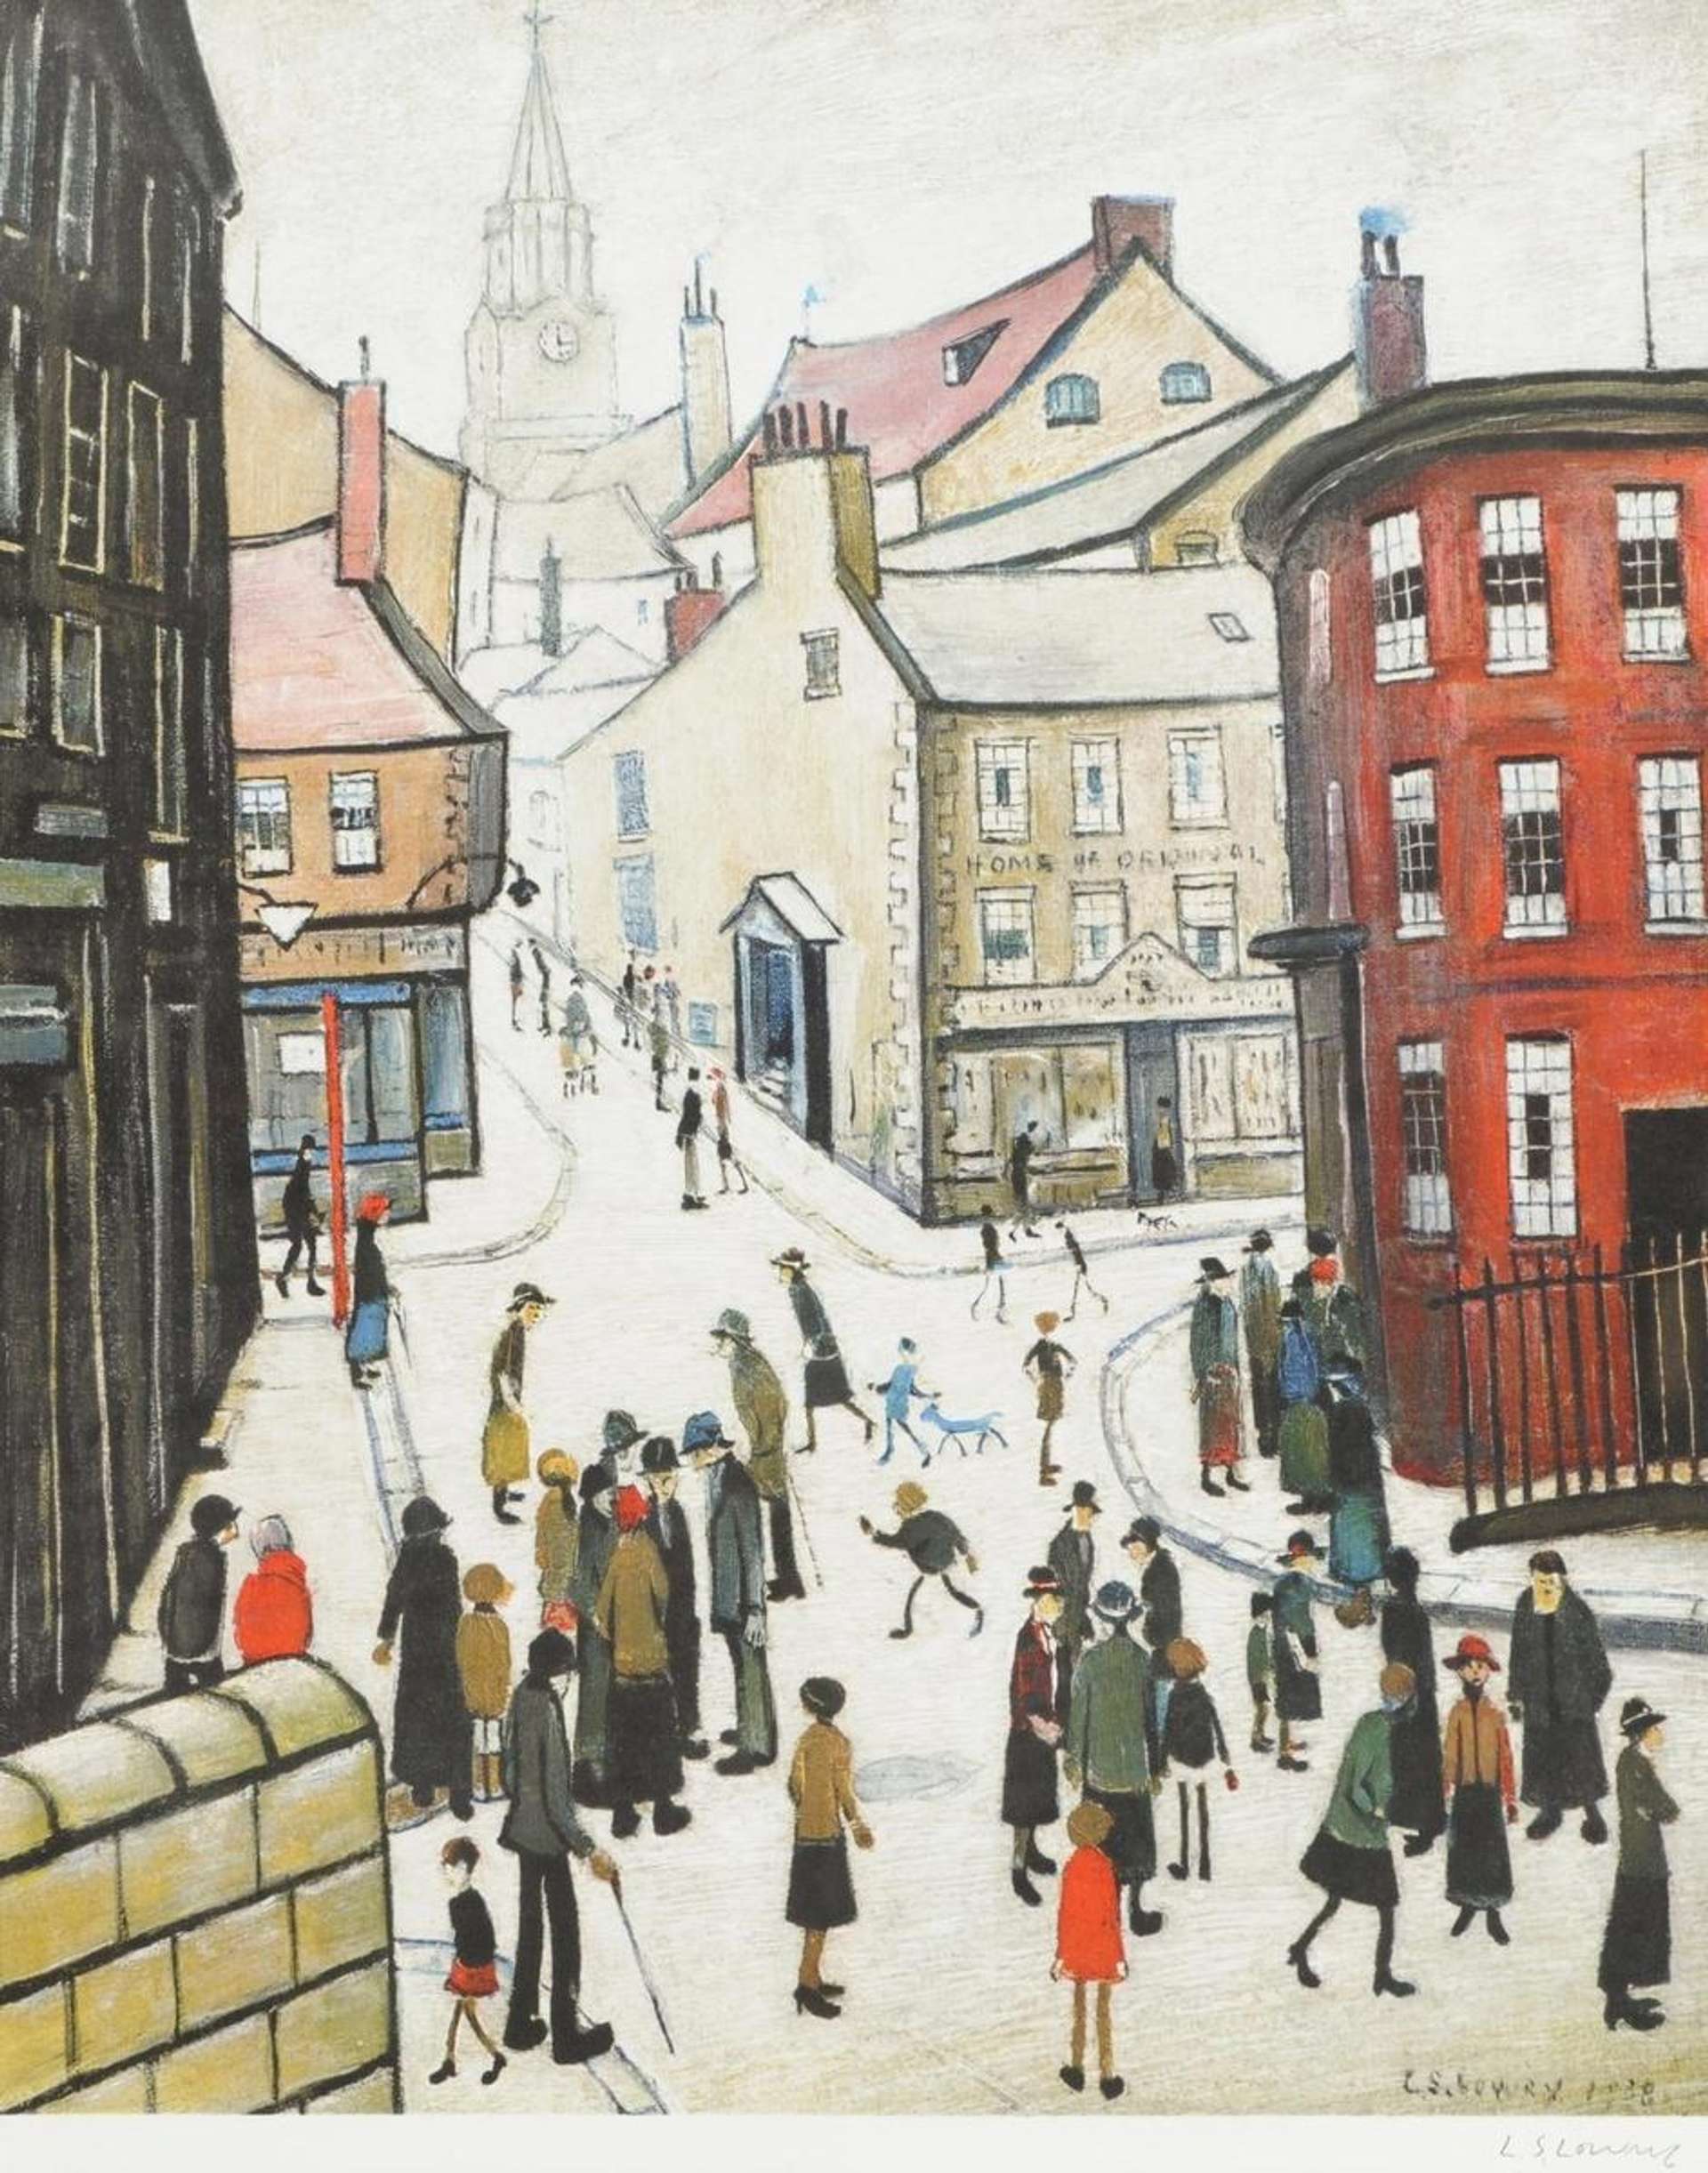  A close-up view of a cornered street in an English town, with a church in the background and buildings painted in red, brown, and white, surrounding matchstick figures gathered in the streets.